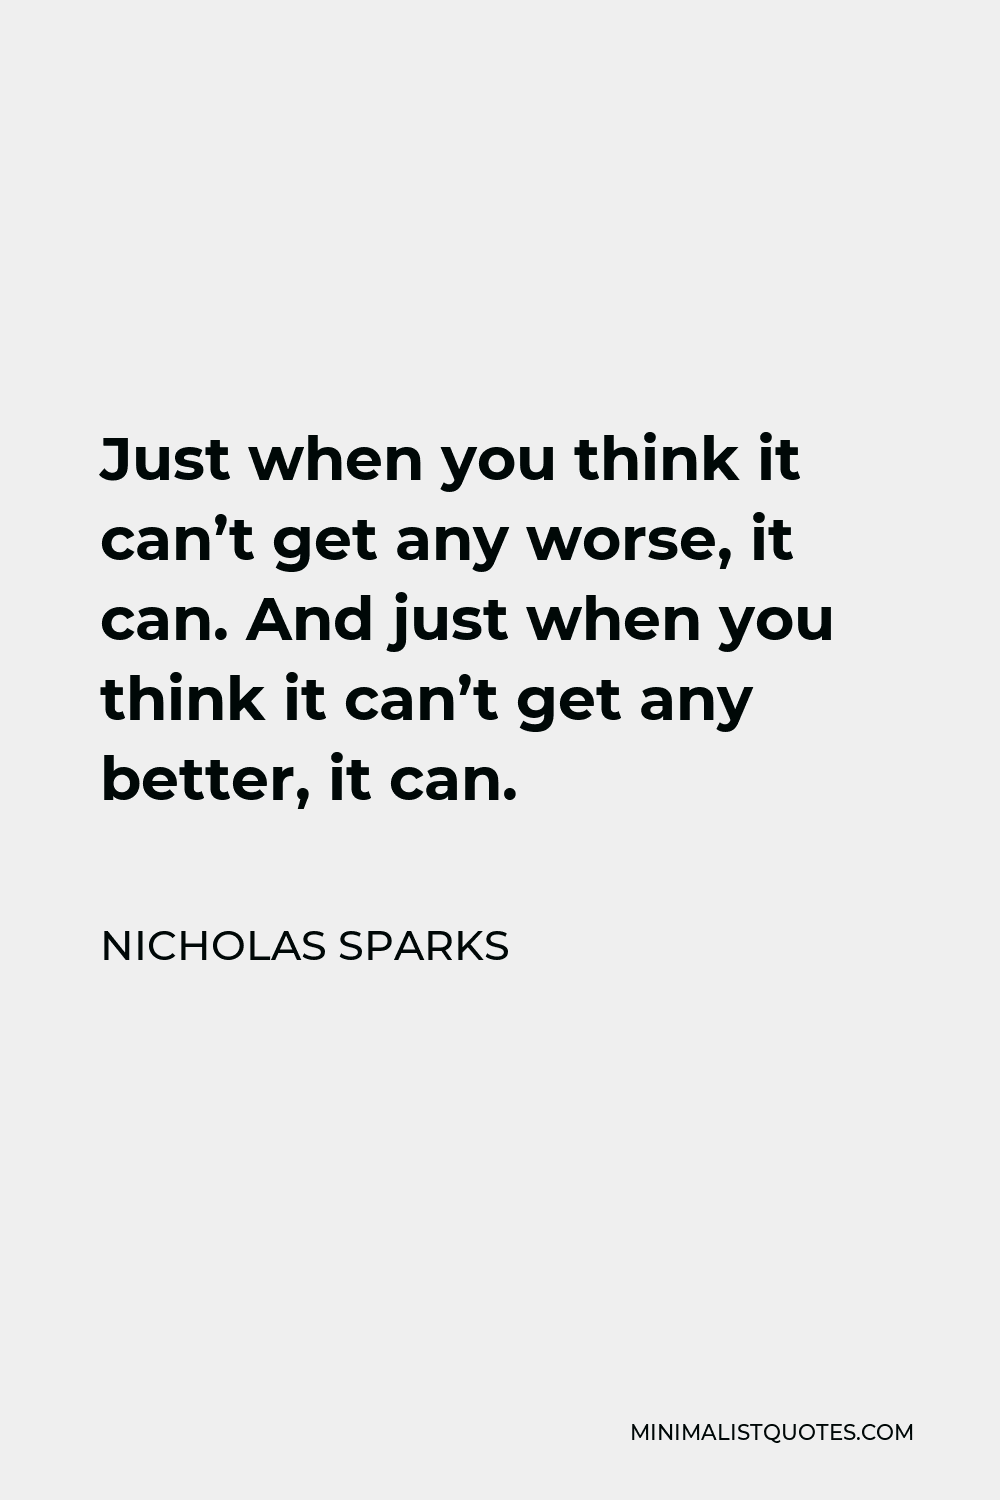 Nicholas Sparks Quote - Just when you think it can’t get any worse, it can. And just when you think it can’t get any better, it can.